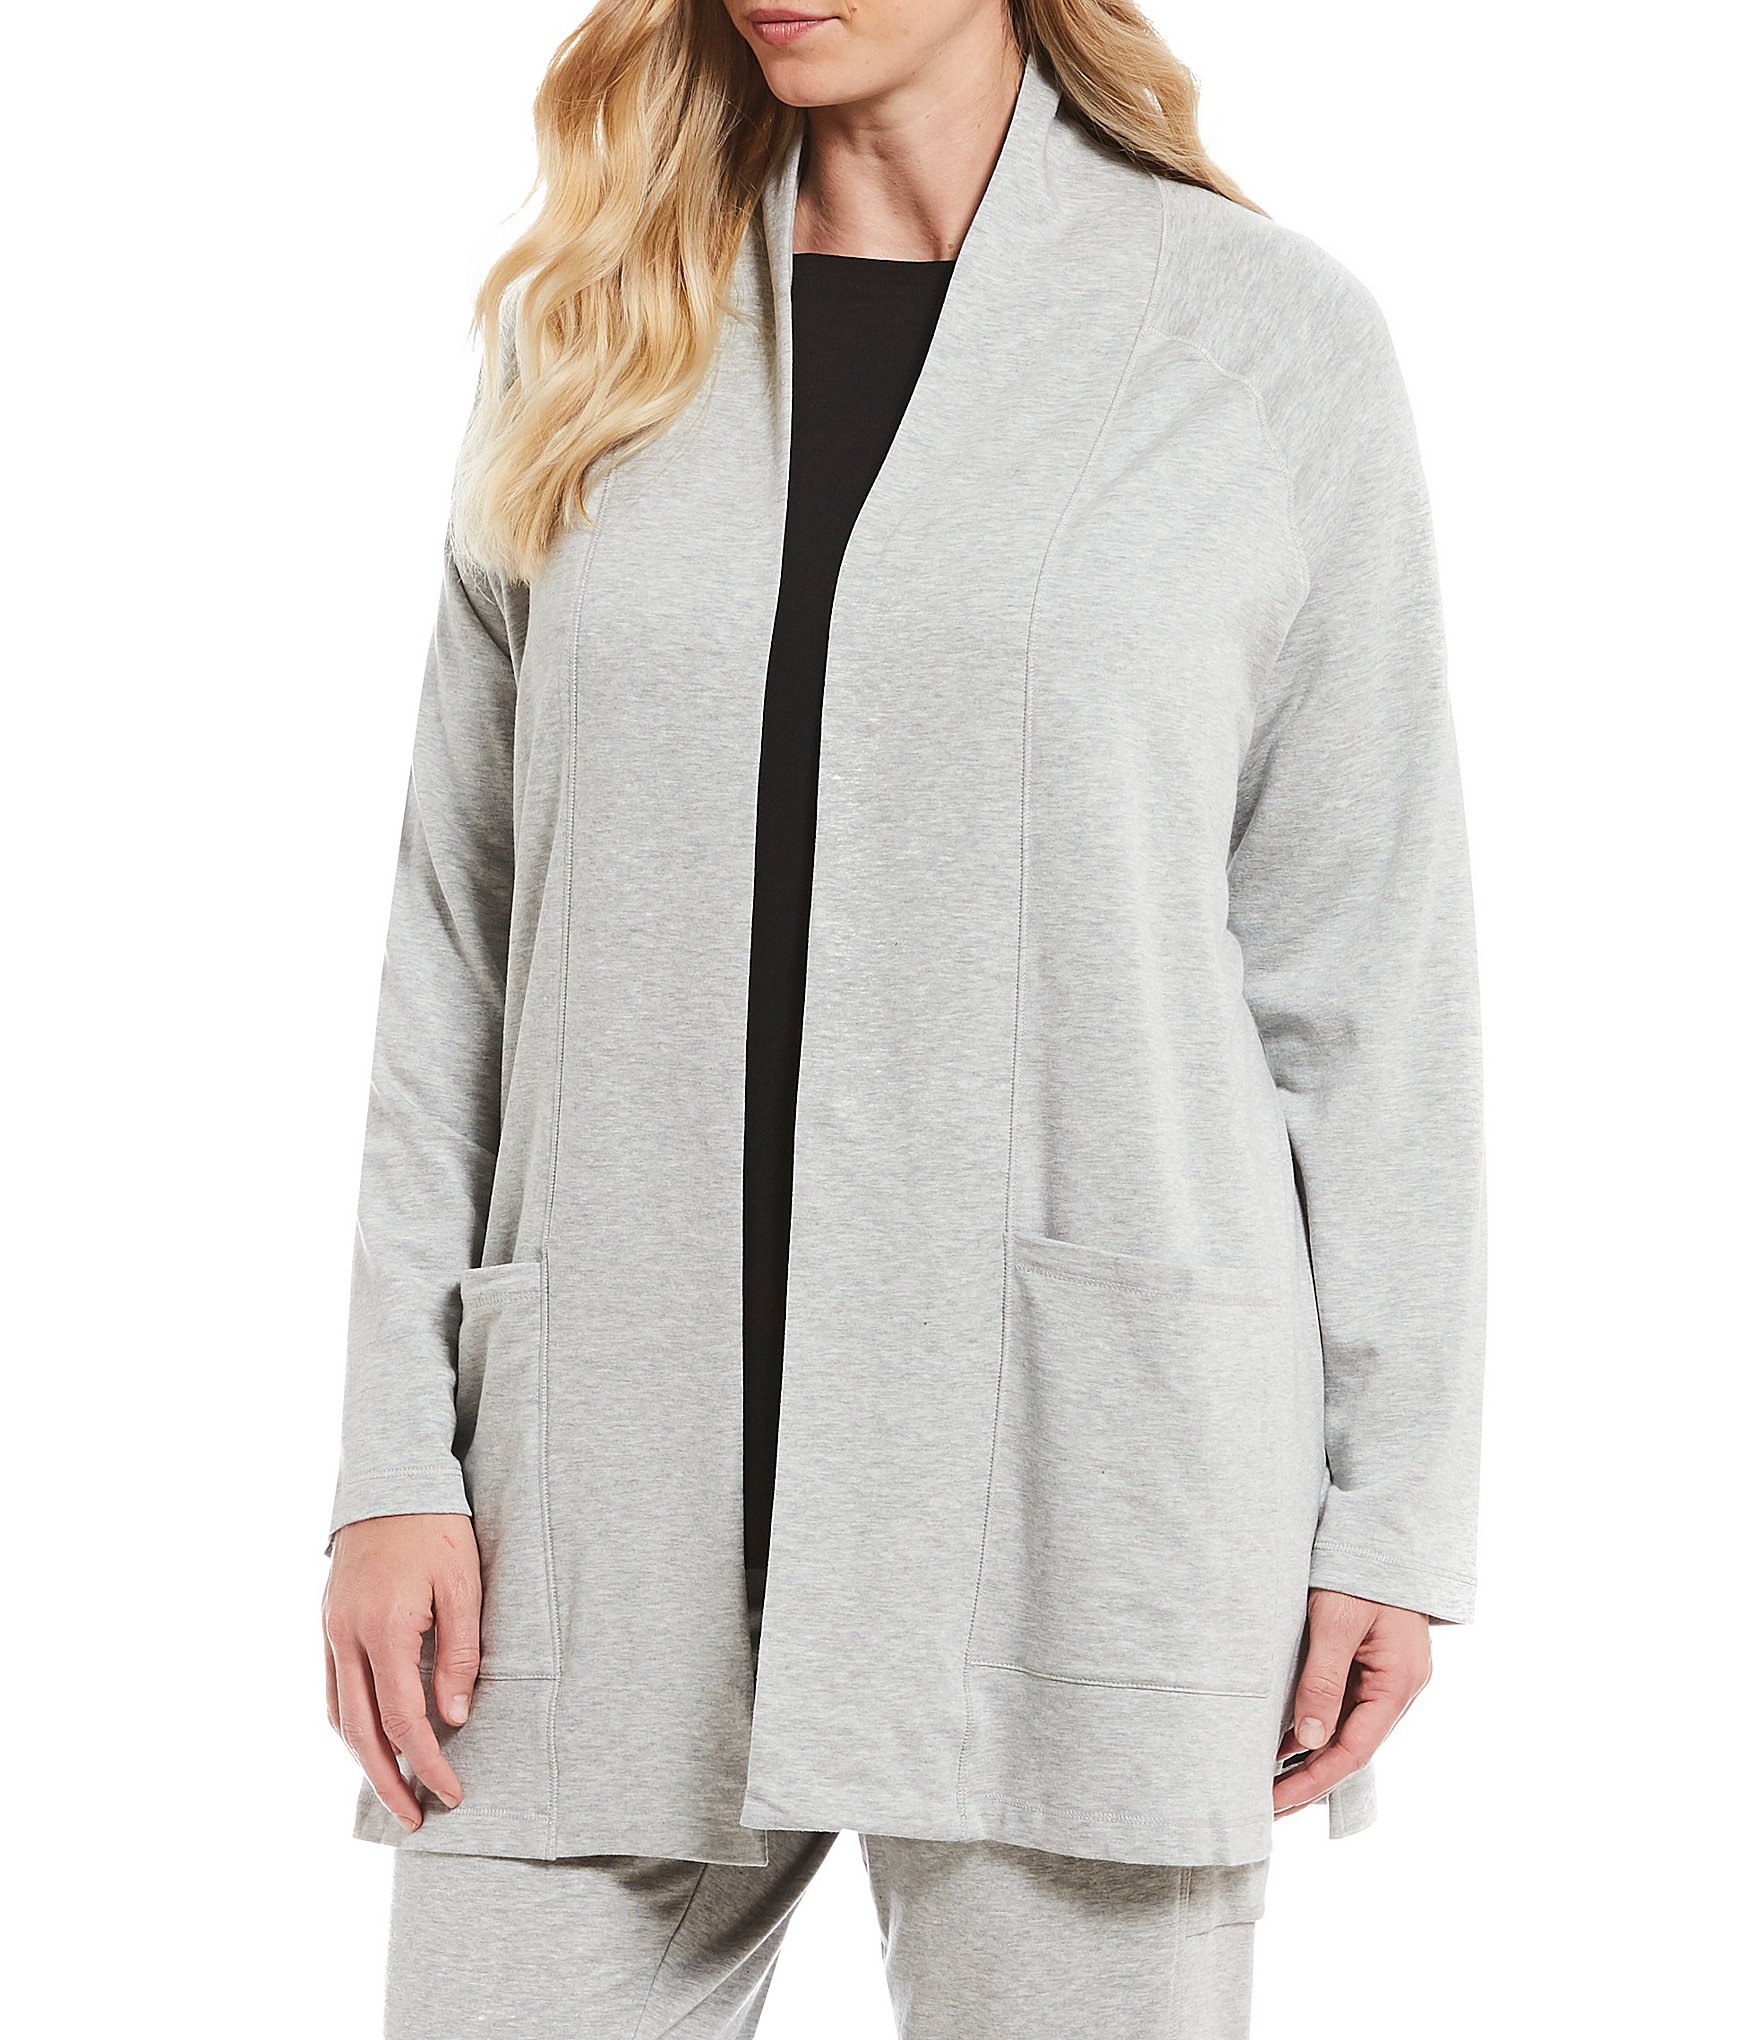 Long sweaters for women at dillards clearance size